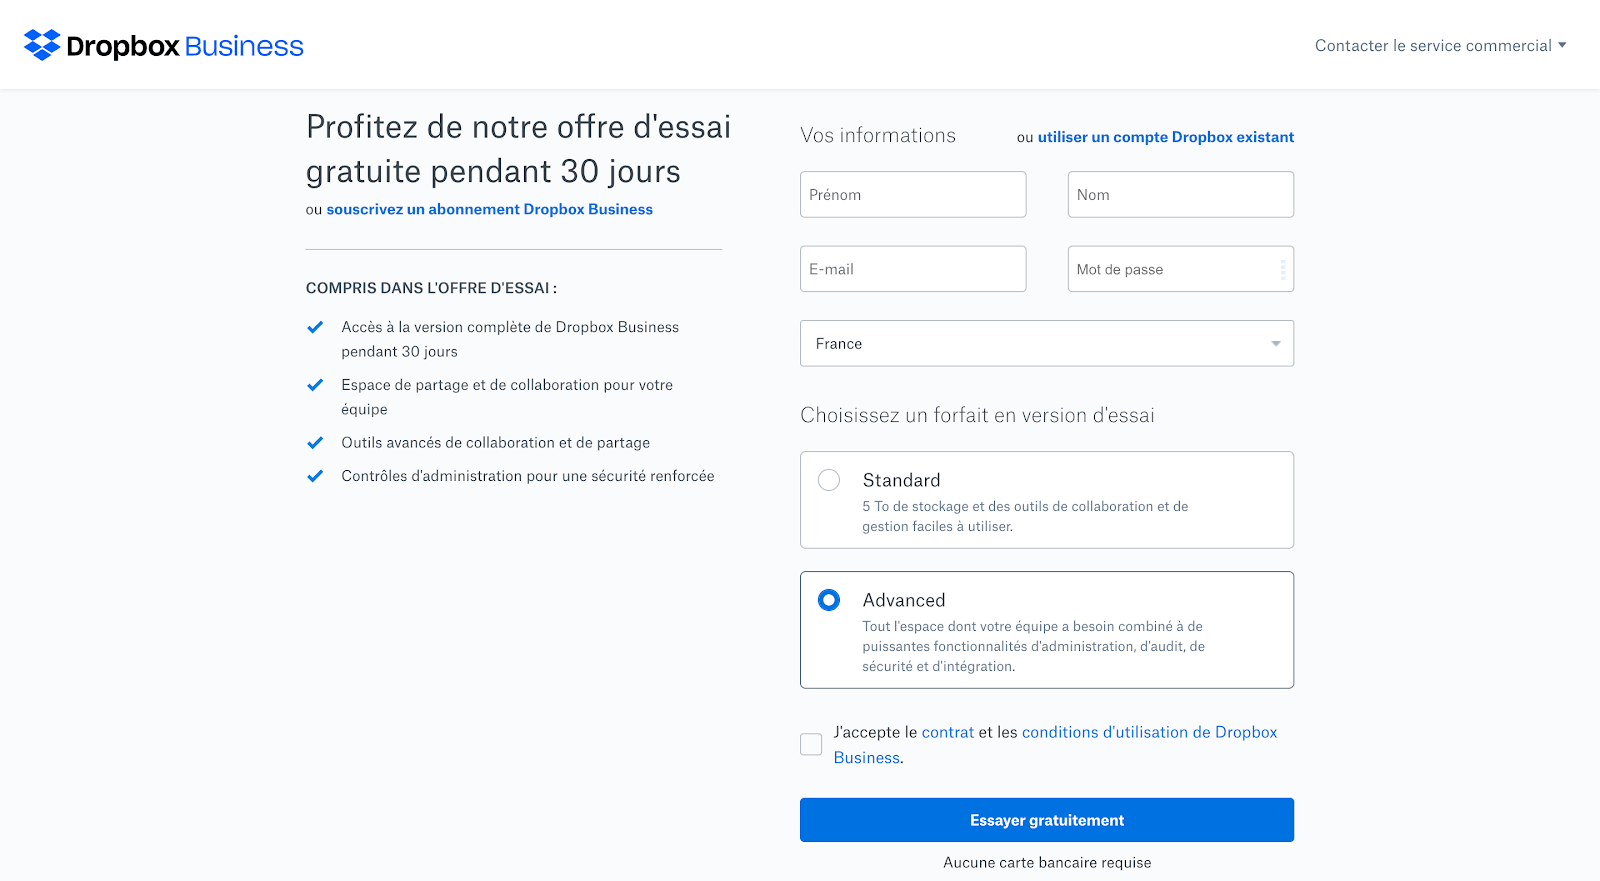 example of the Dropbox landing page which presents its benefits